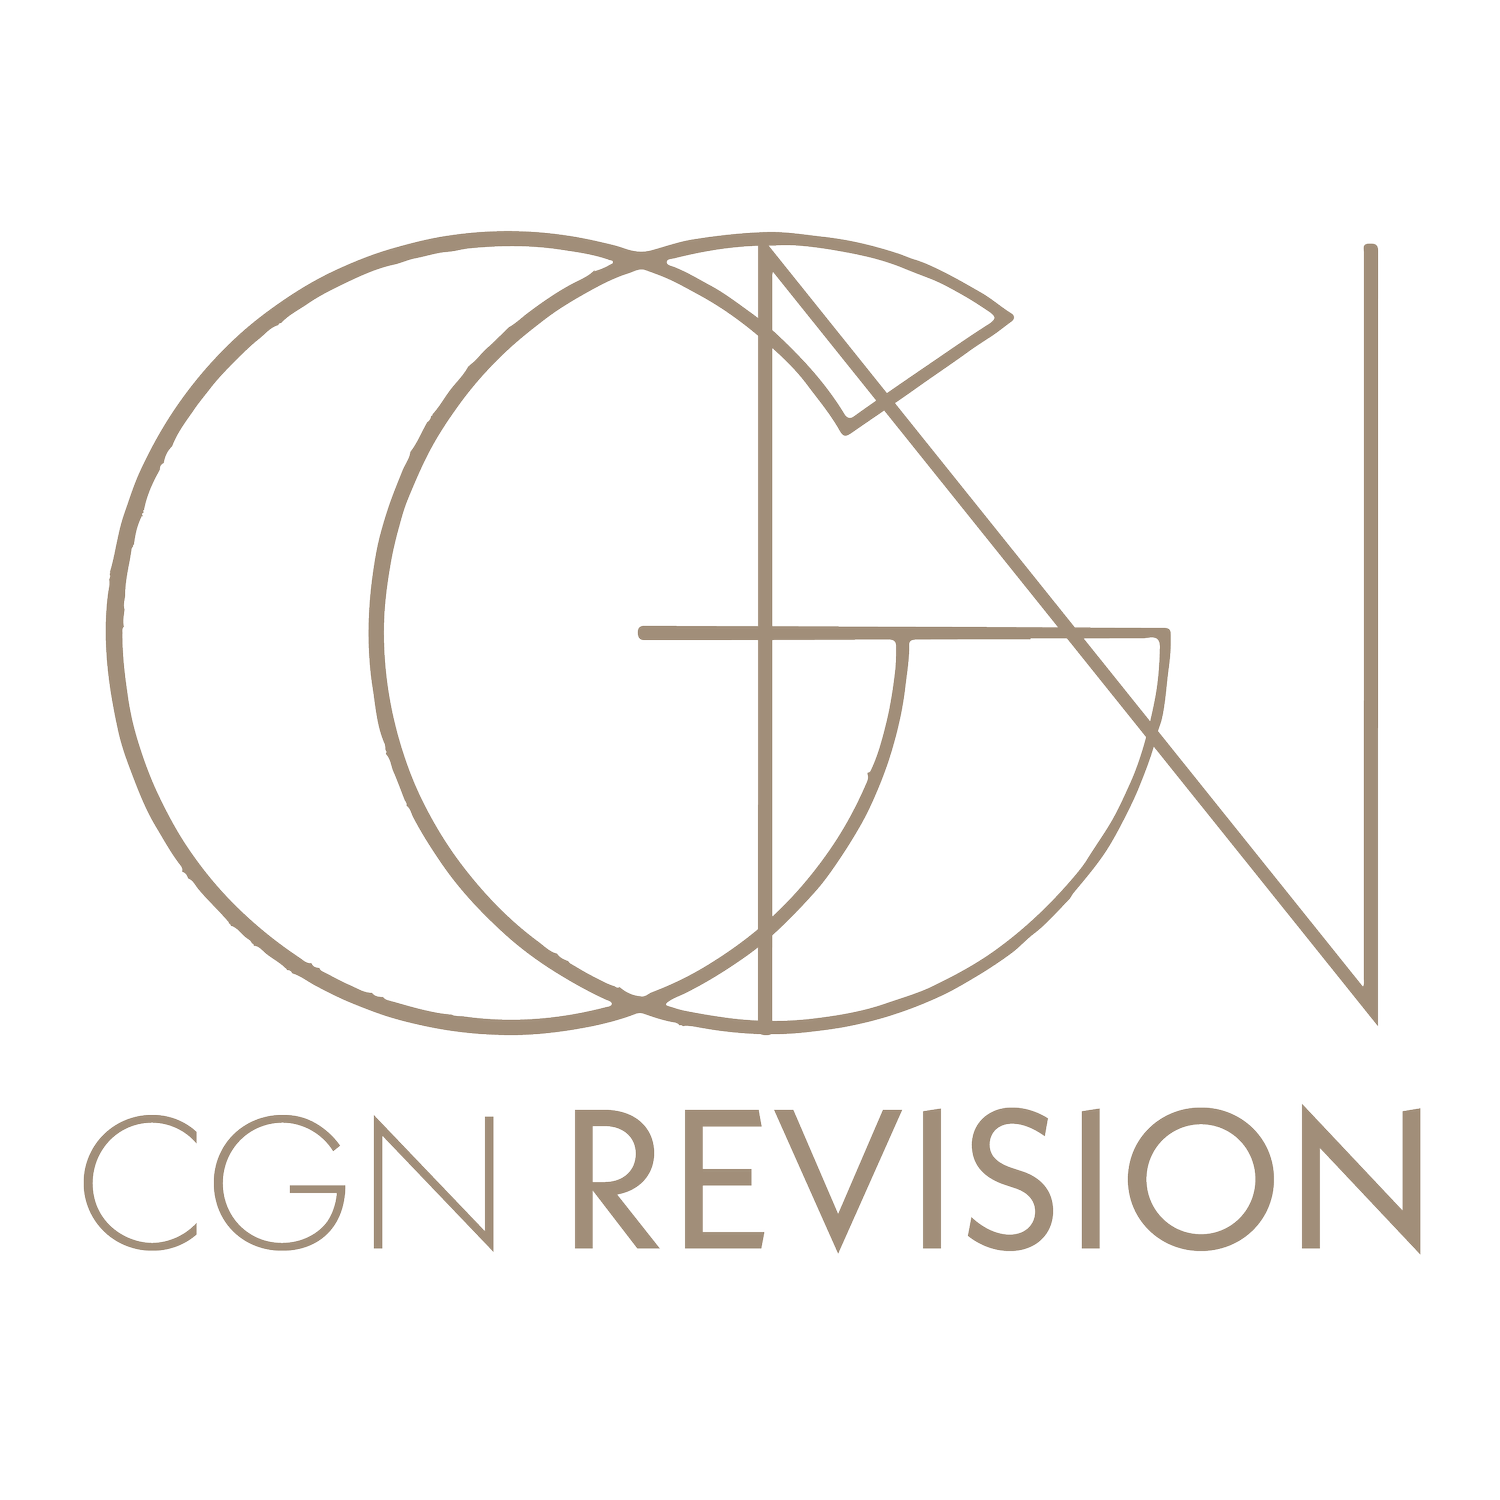 CGN Revision